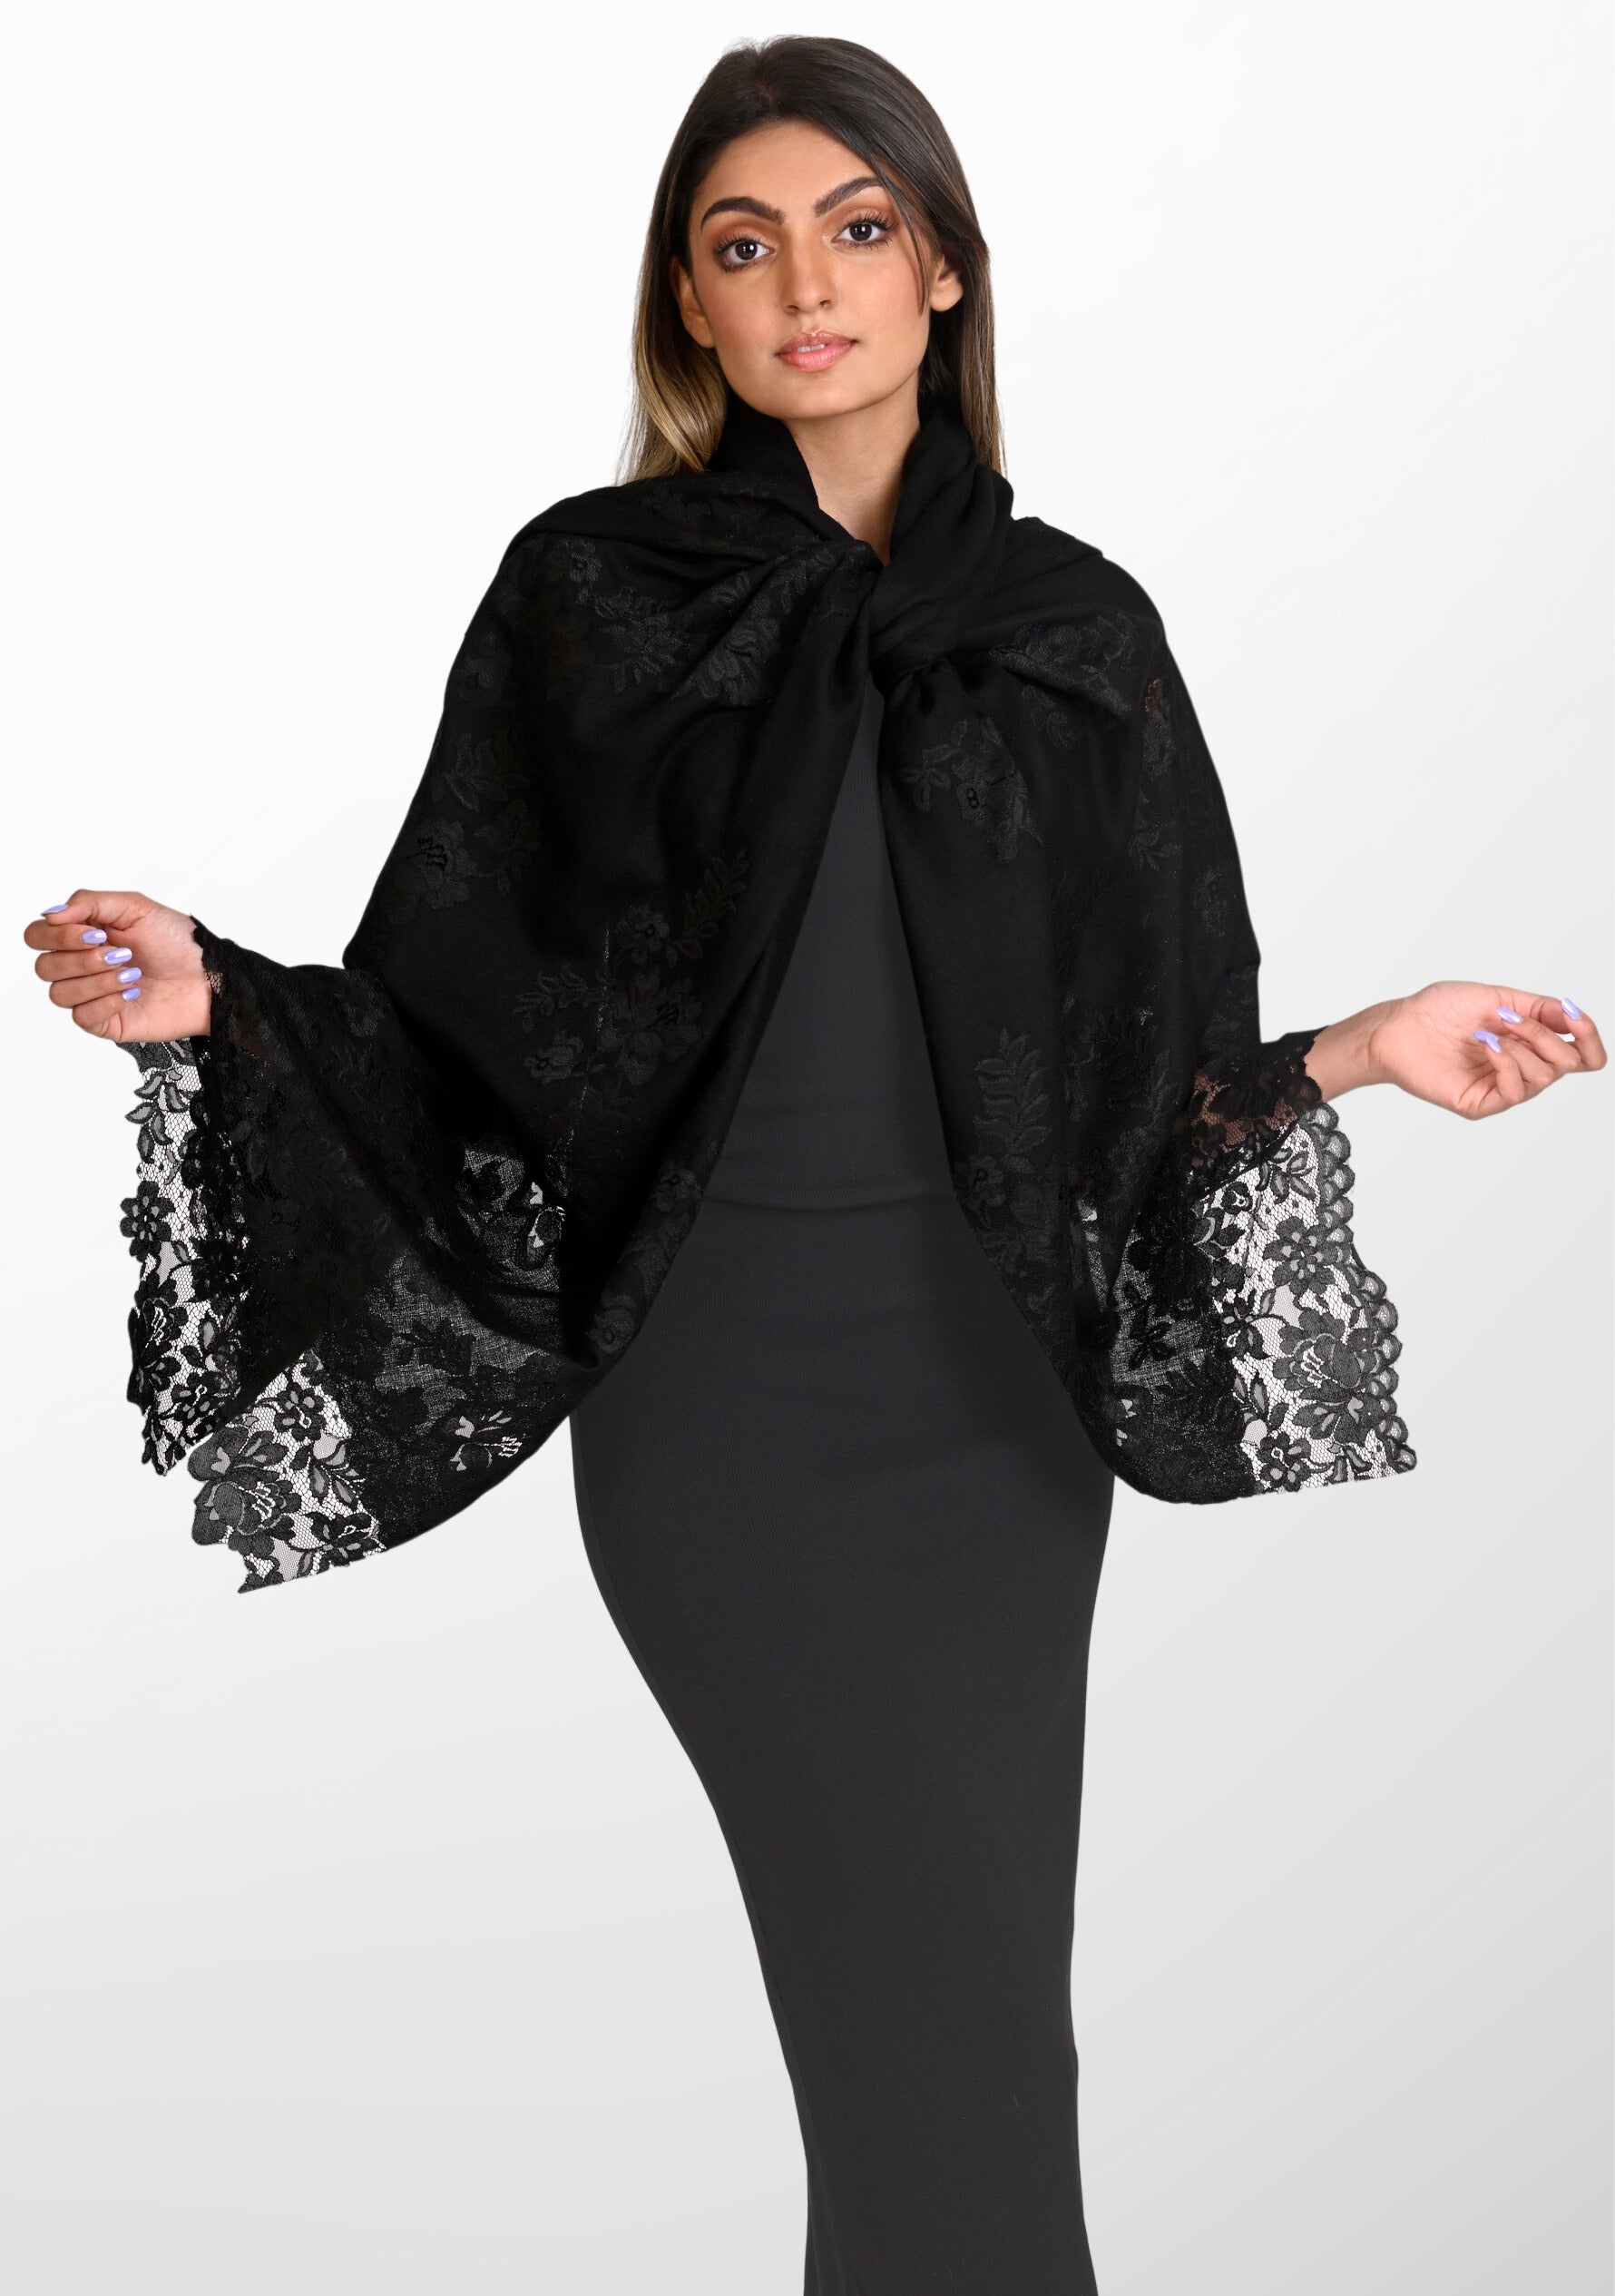 Black Cashmere Scarf with Black Chantilly Lace | Maneesha Ruia